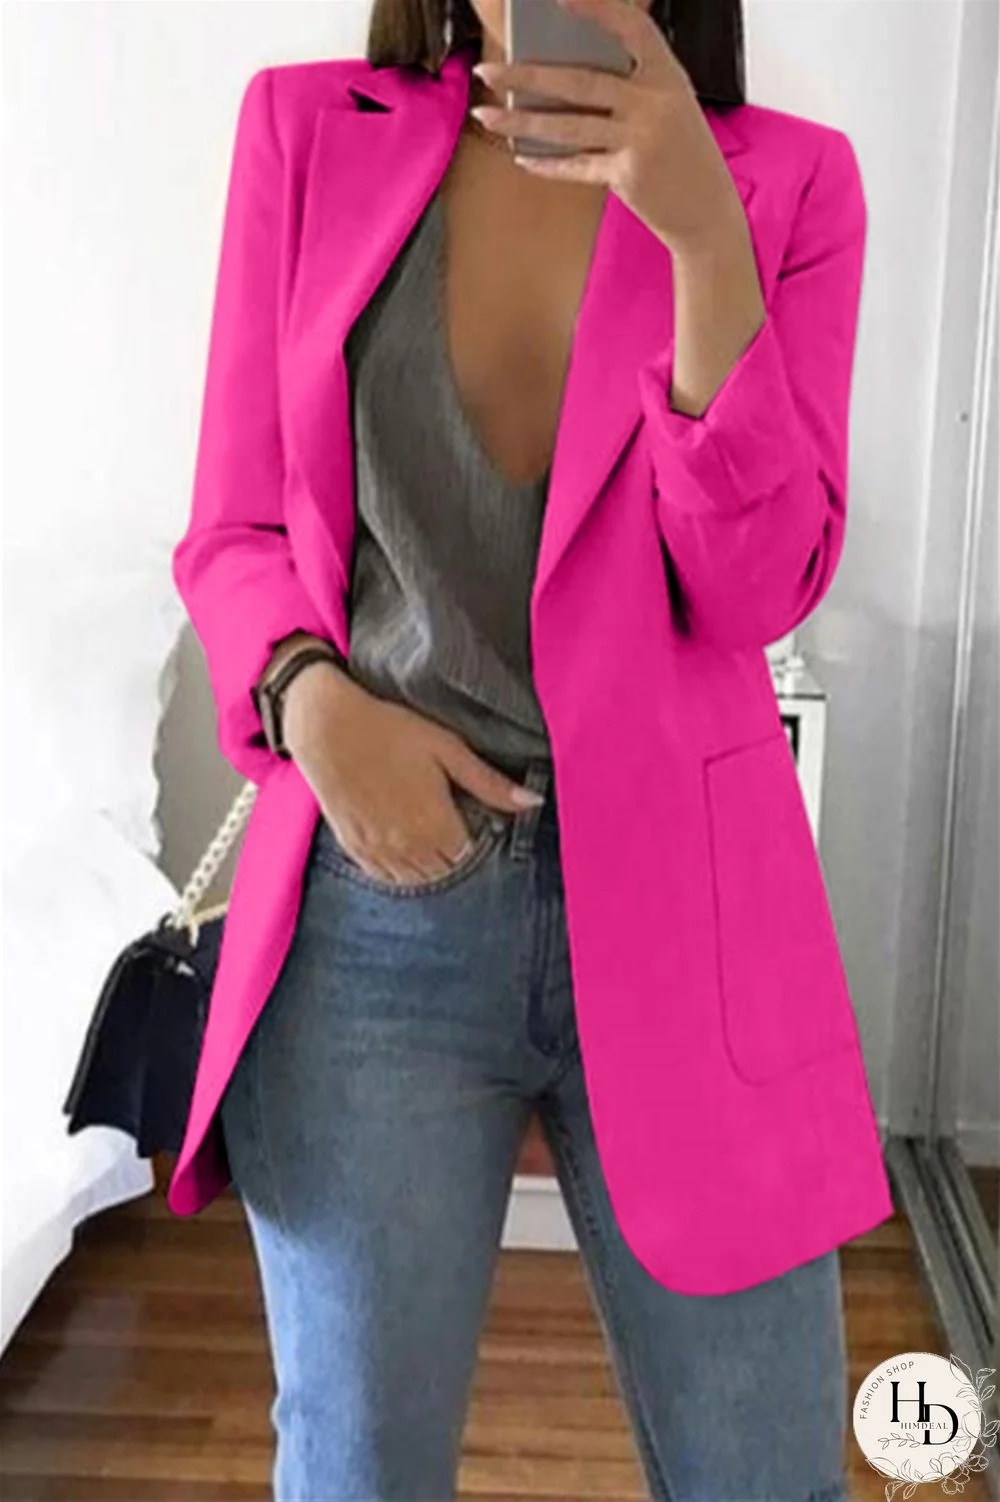 Rose Red Casual Long Sleeves Suit Jacket